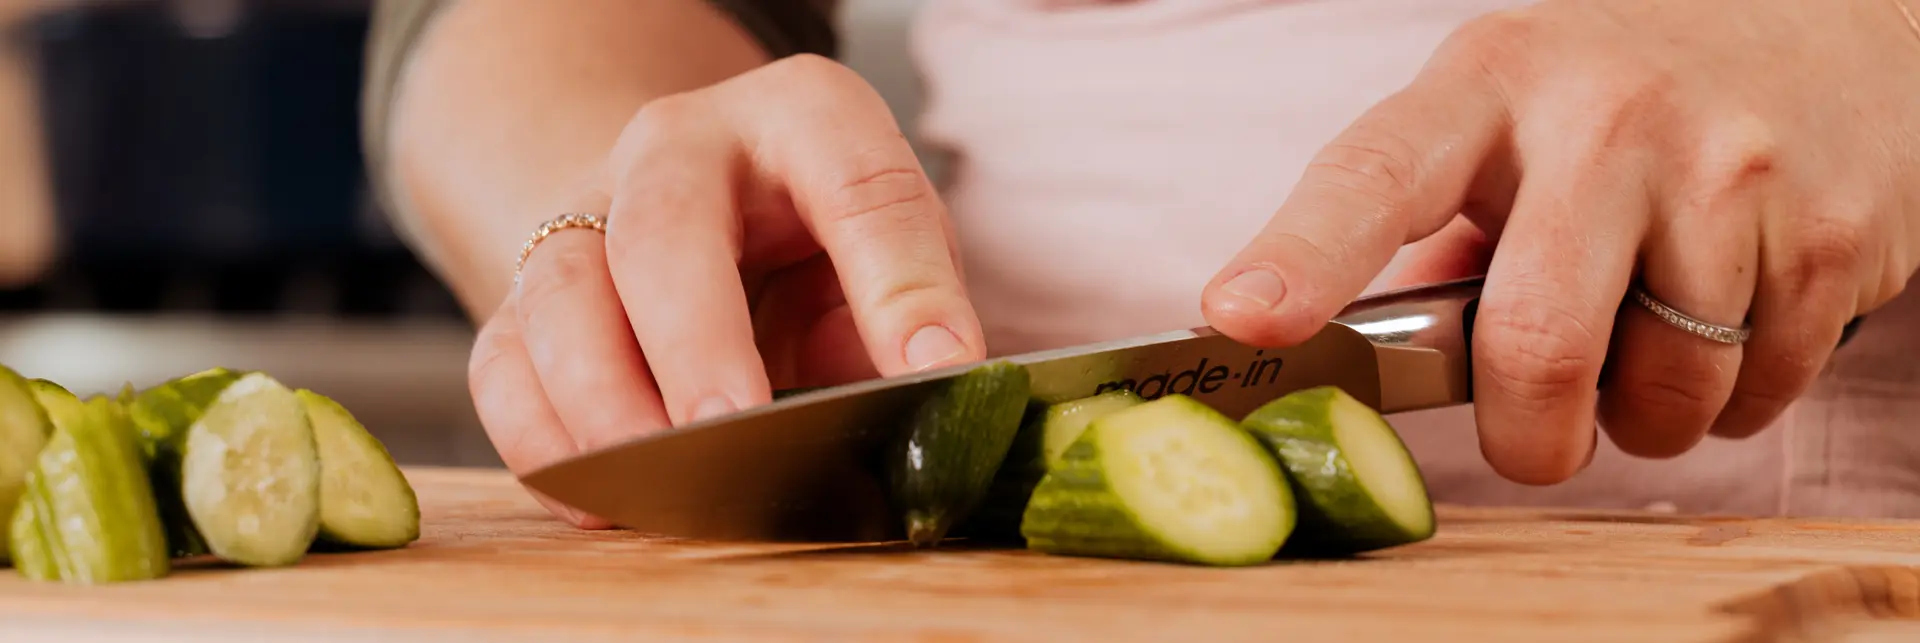 A person is slicing cucumber on a wooden cutting board.